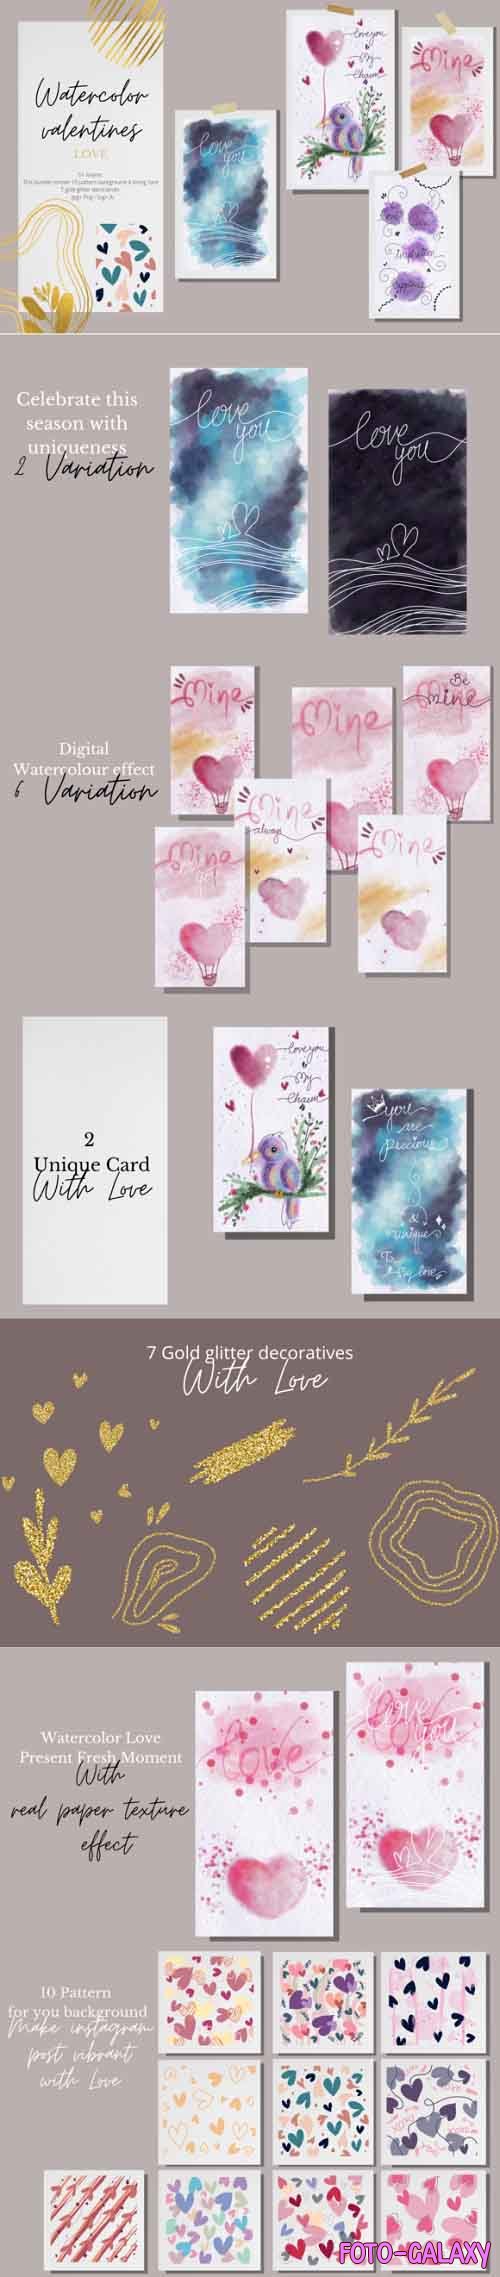  Watercolor Valentines Collection